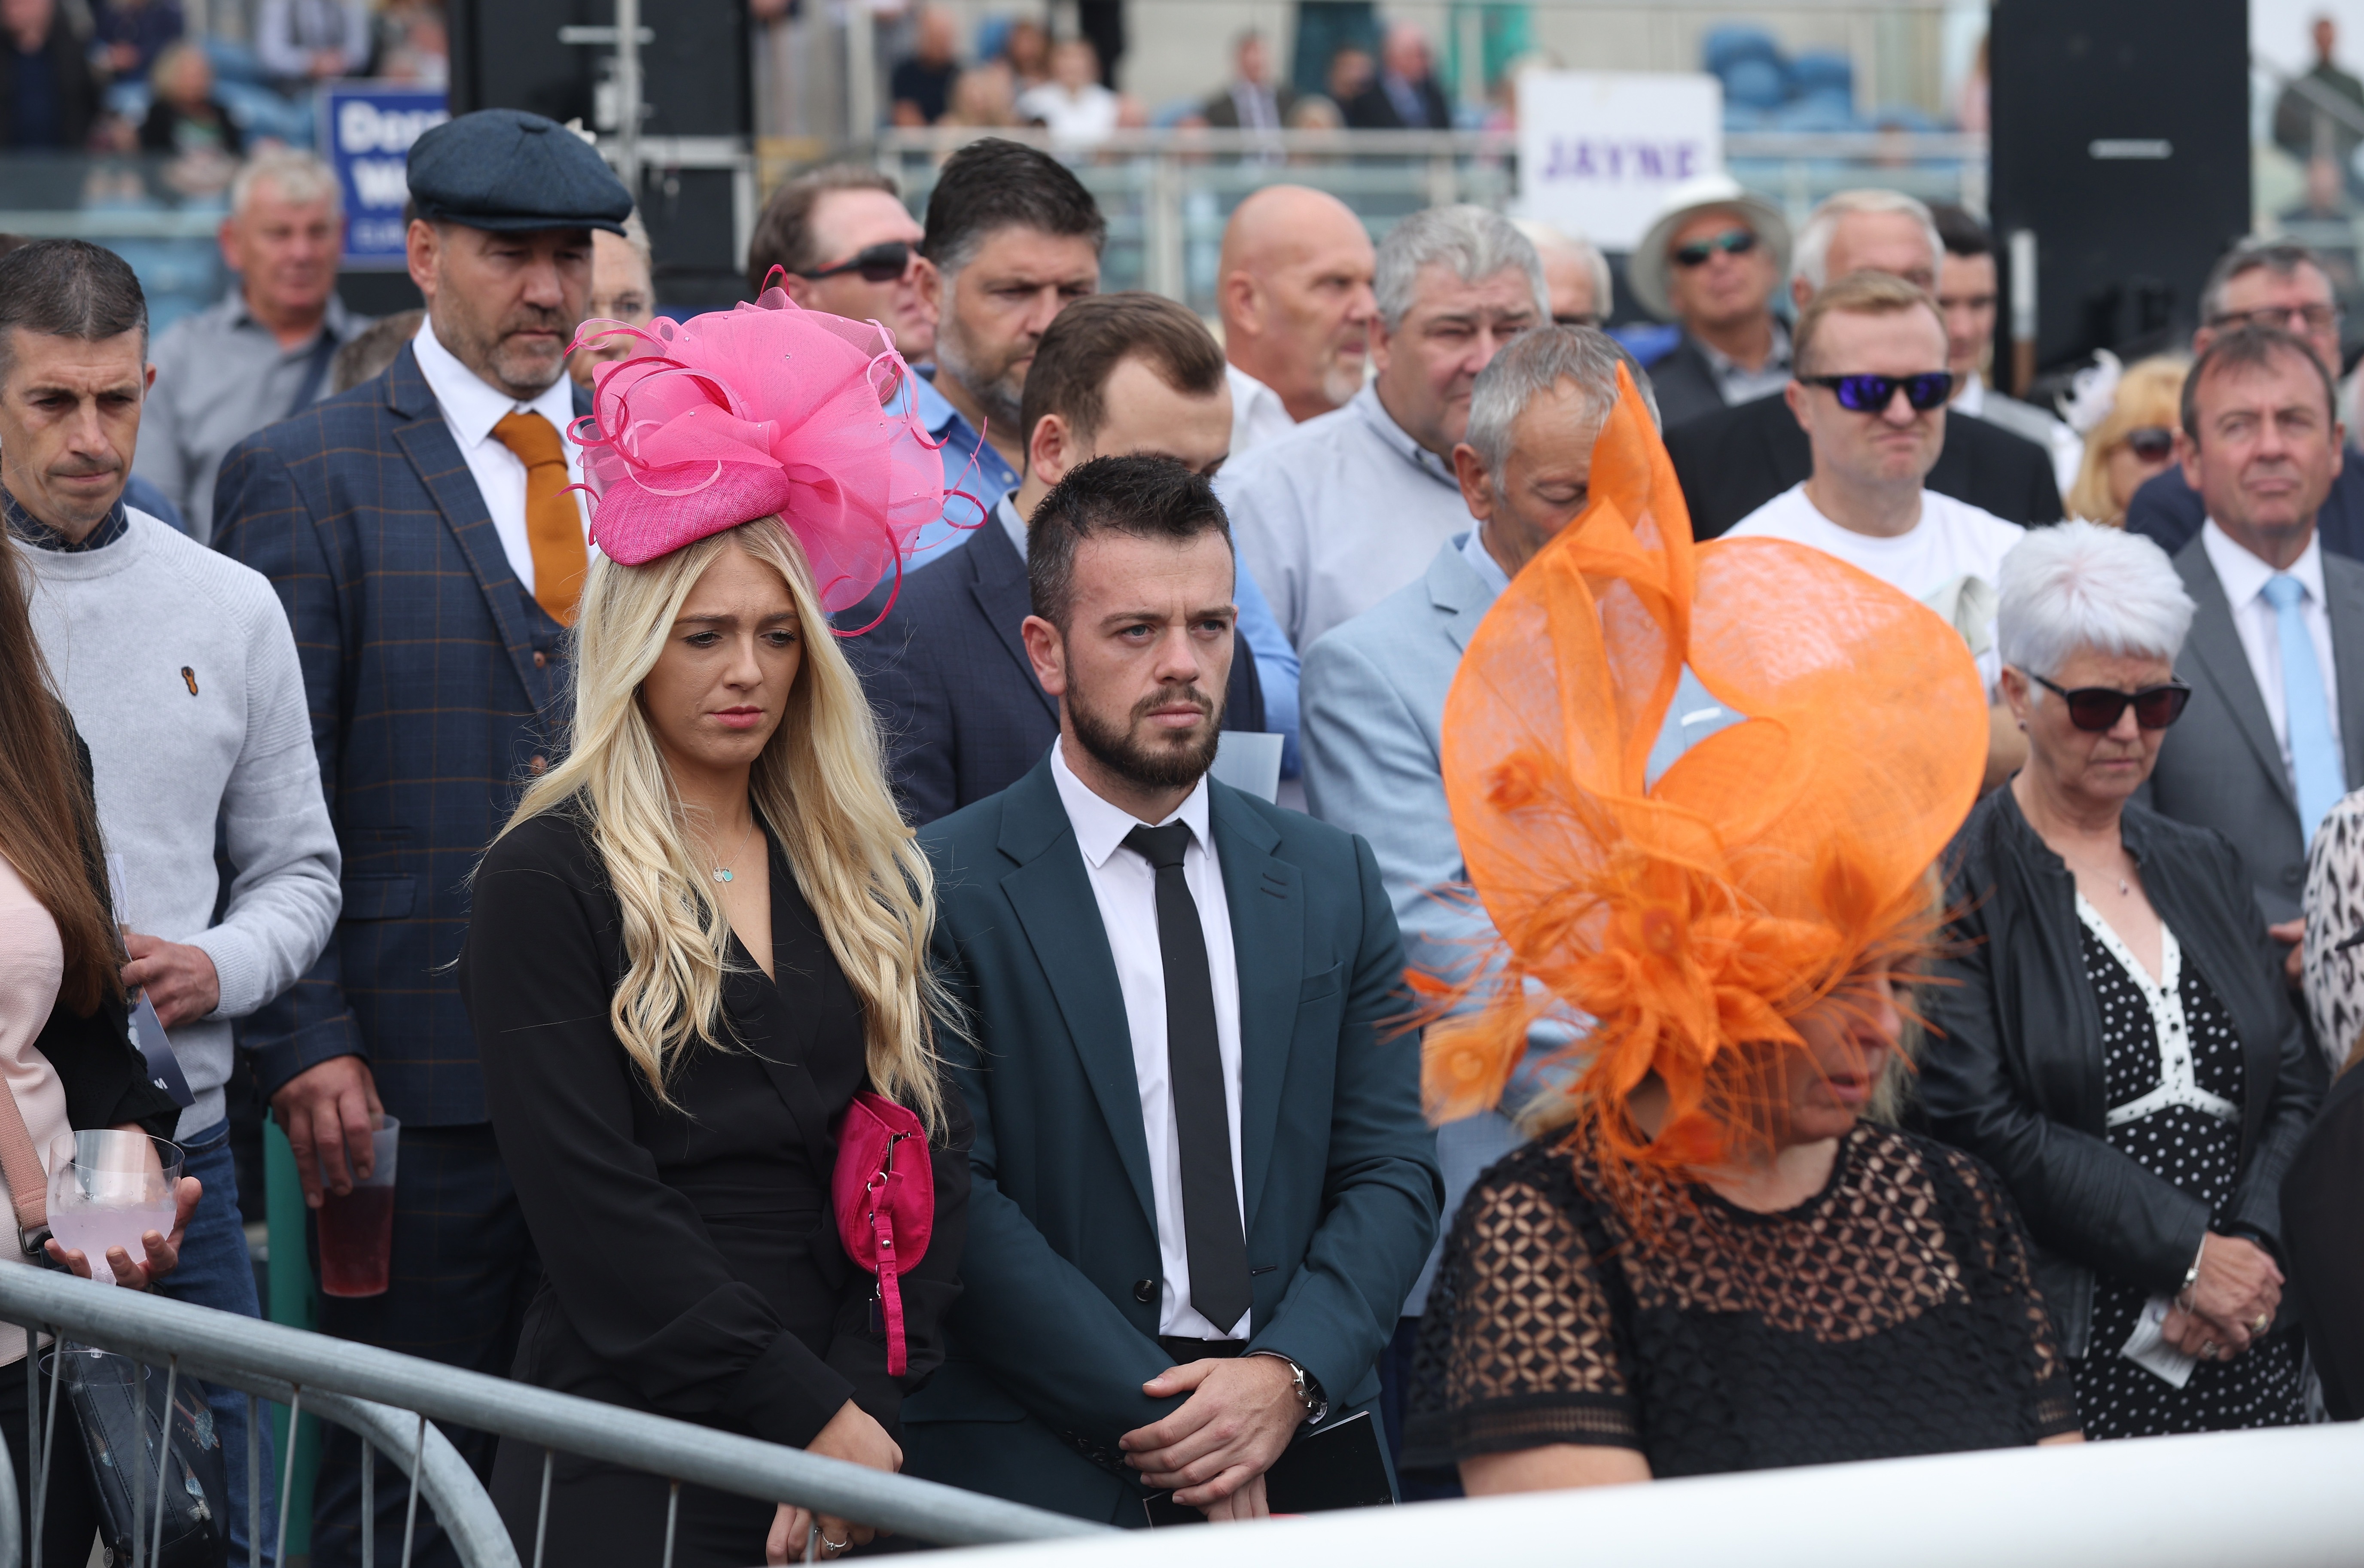 , Frankie Dettori visibly emotional remembering The Queen at Doncaster as he joins jockeys in black armbands and silence